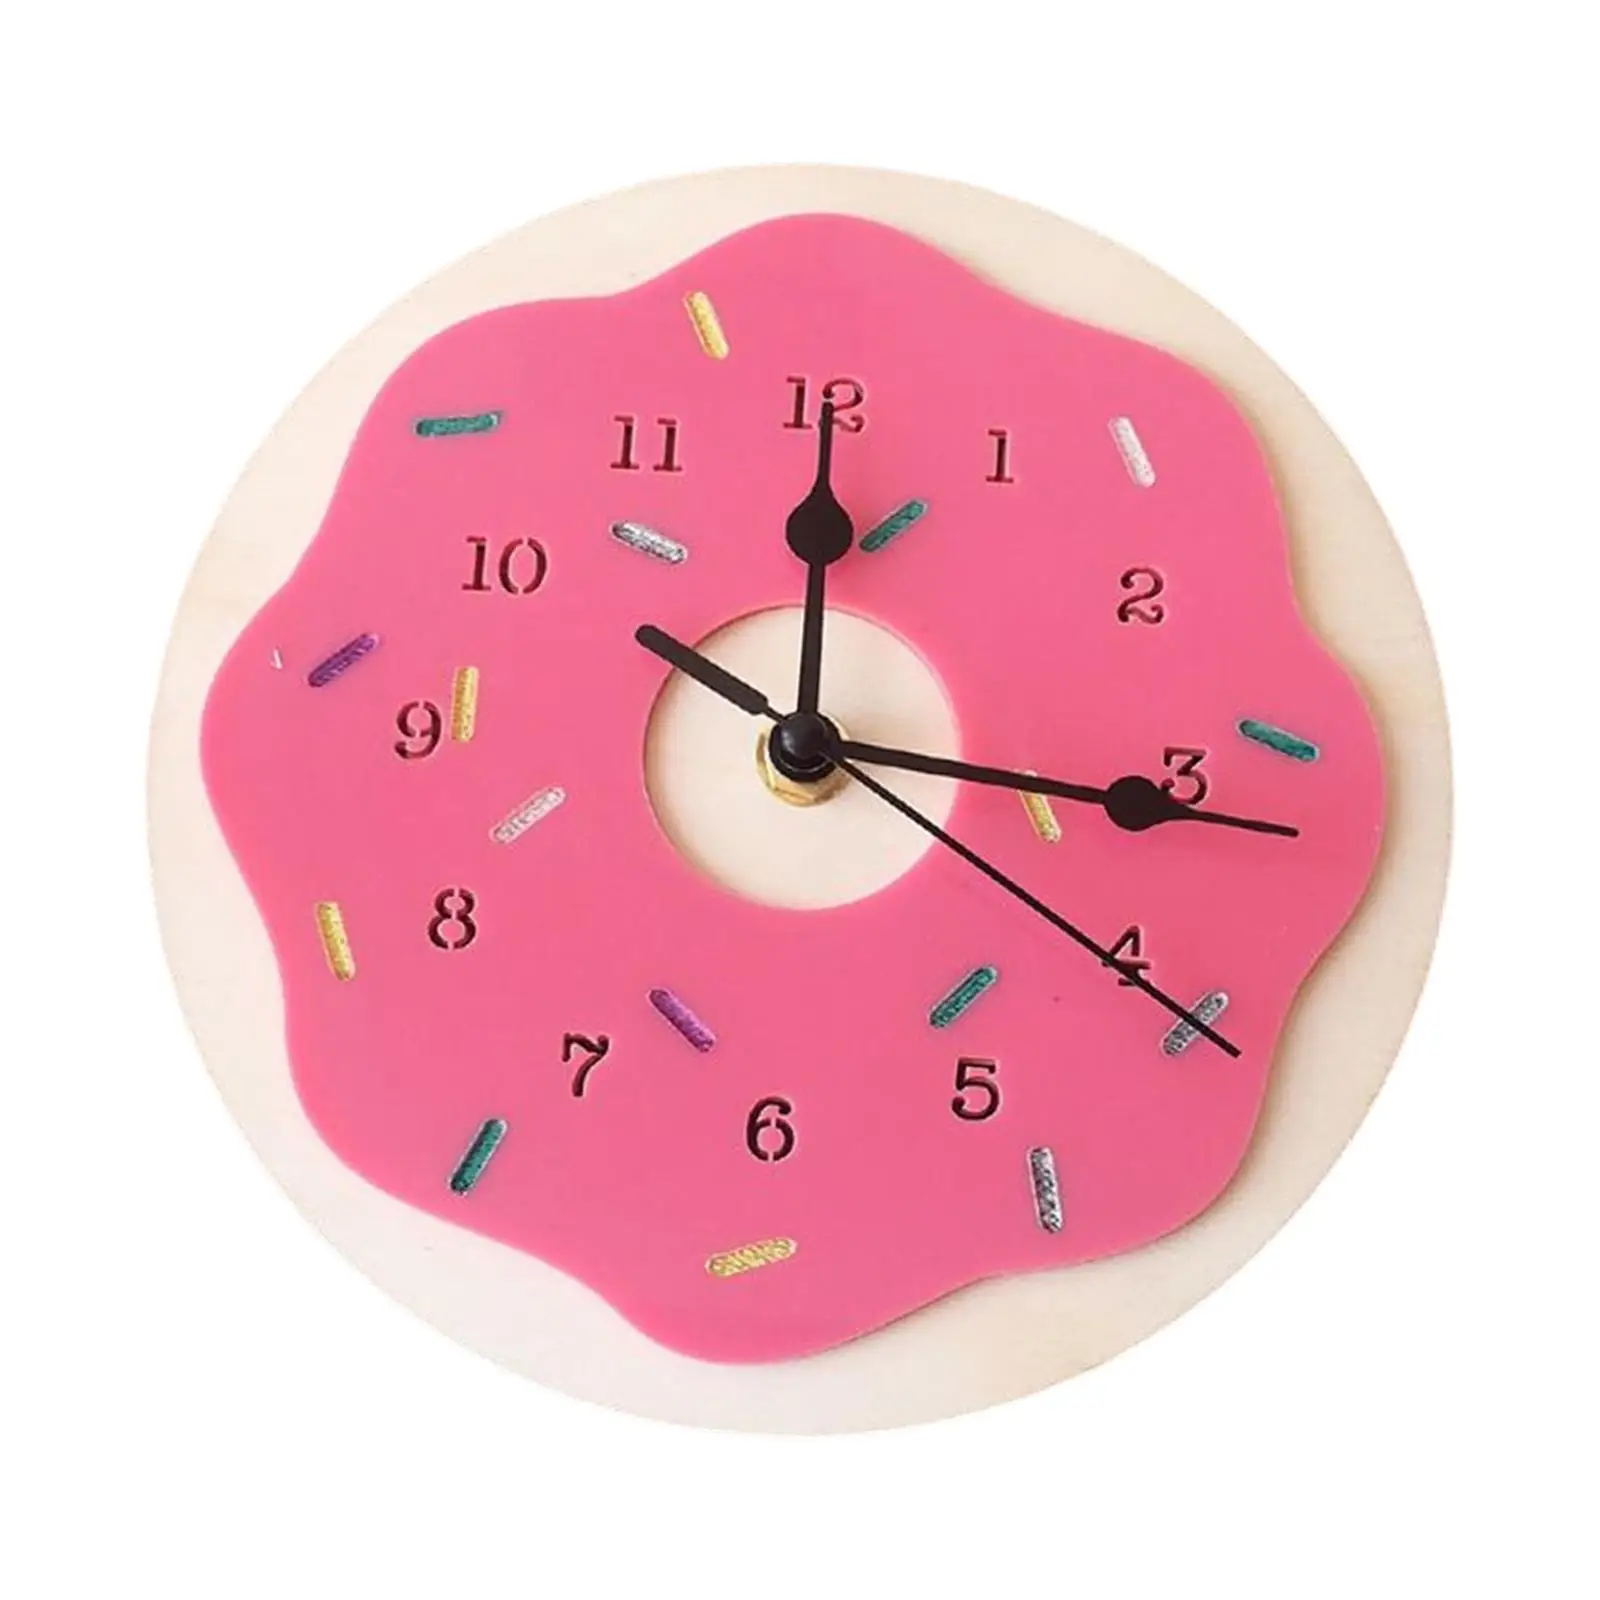 Nordic Style Donut Shaped Wall Clock Silent Art Decor Wooden Ornament Gift Crafts for Kids Room Home Living Room Nursery Shop